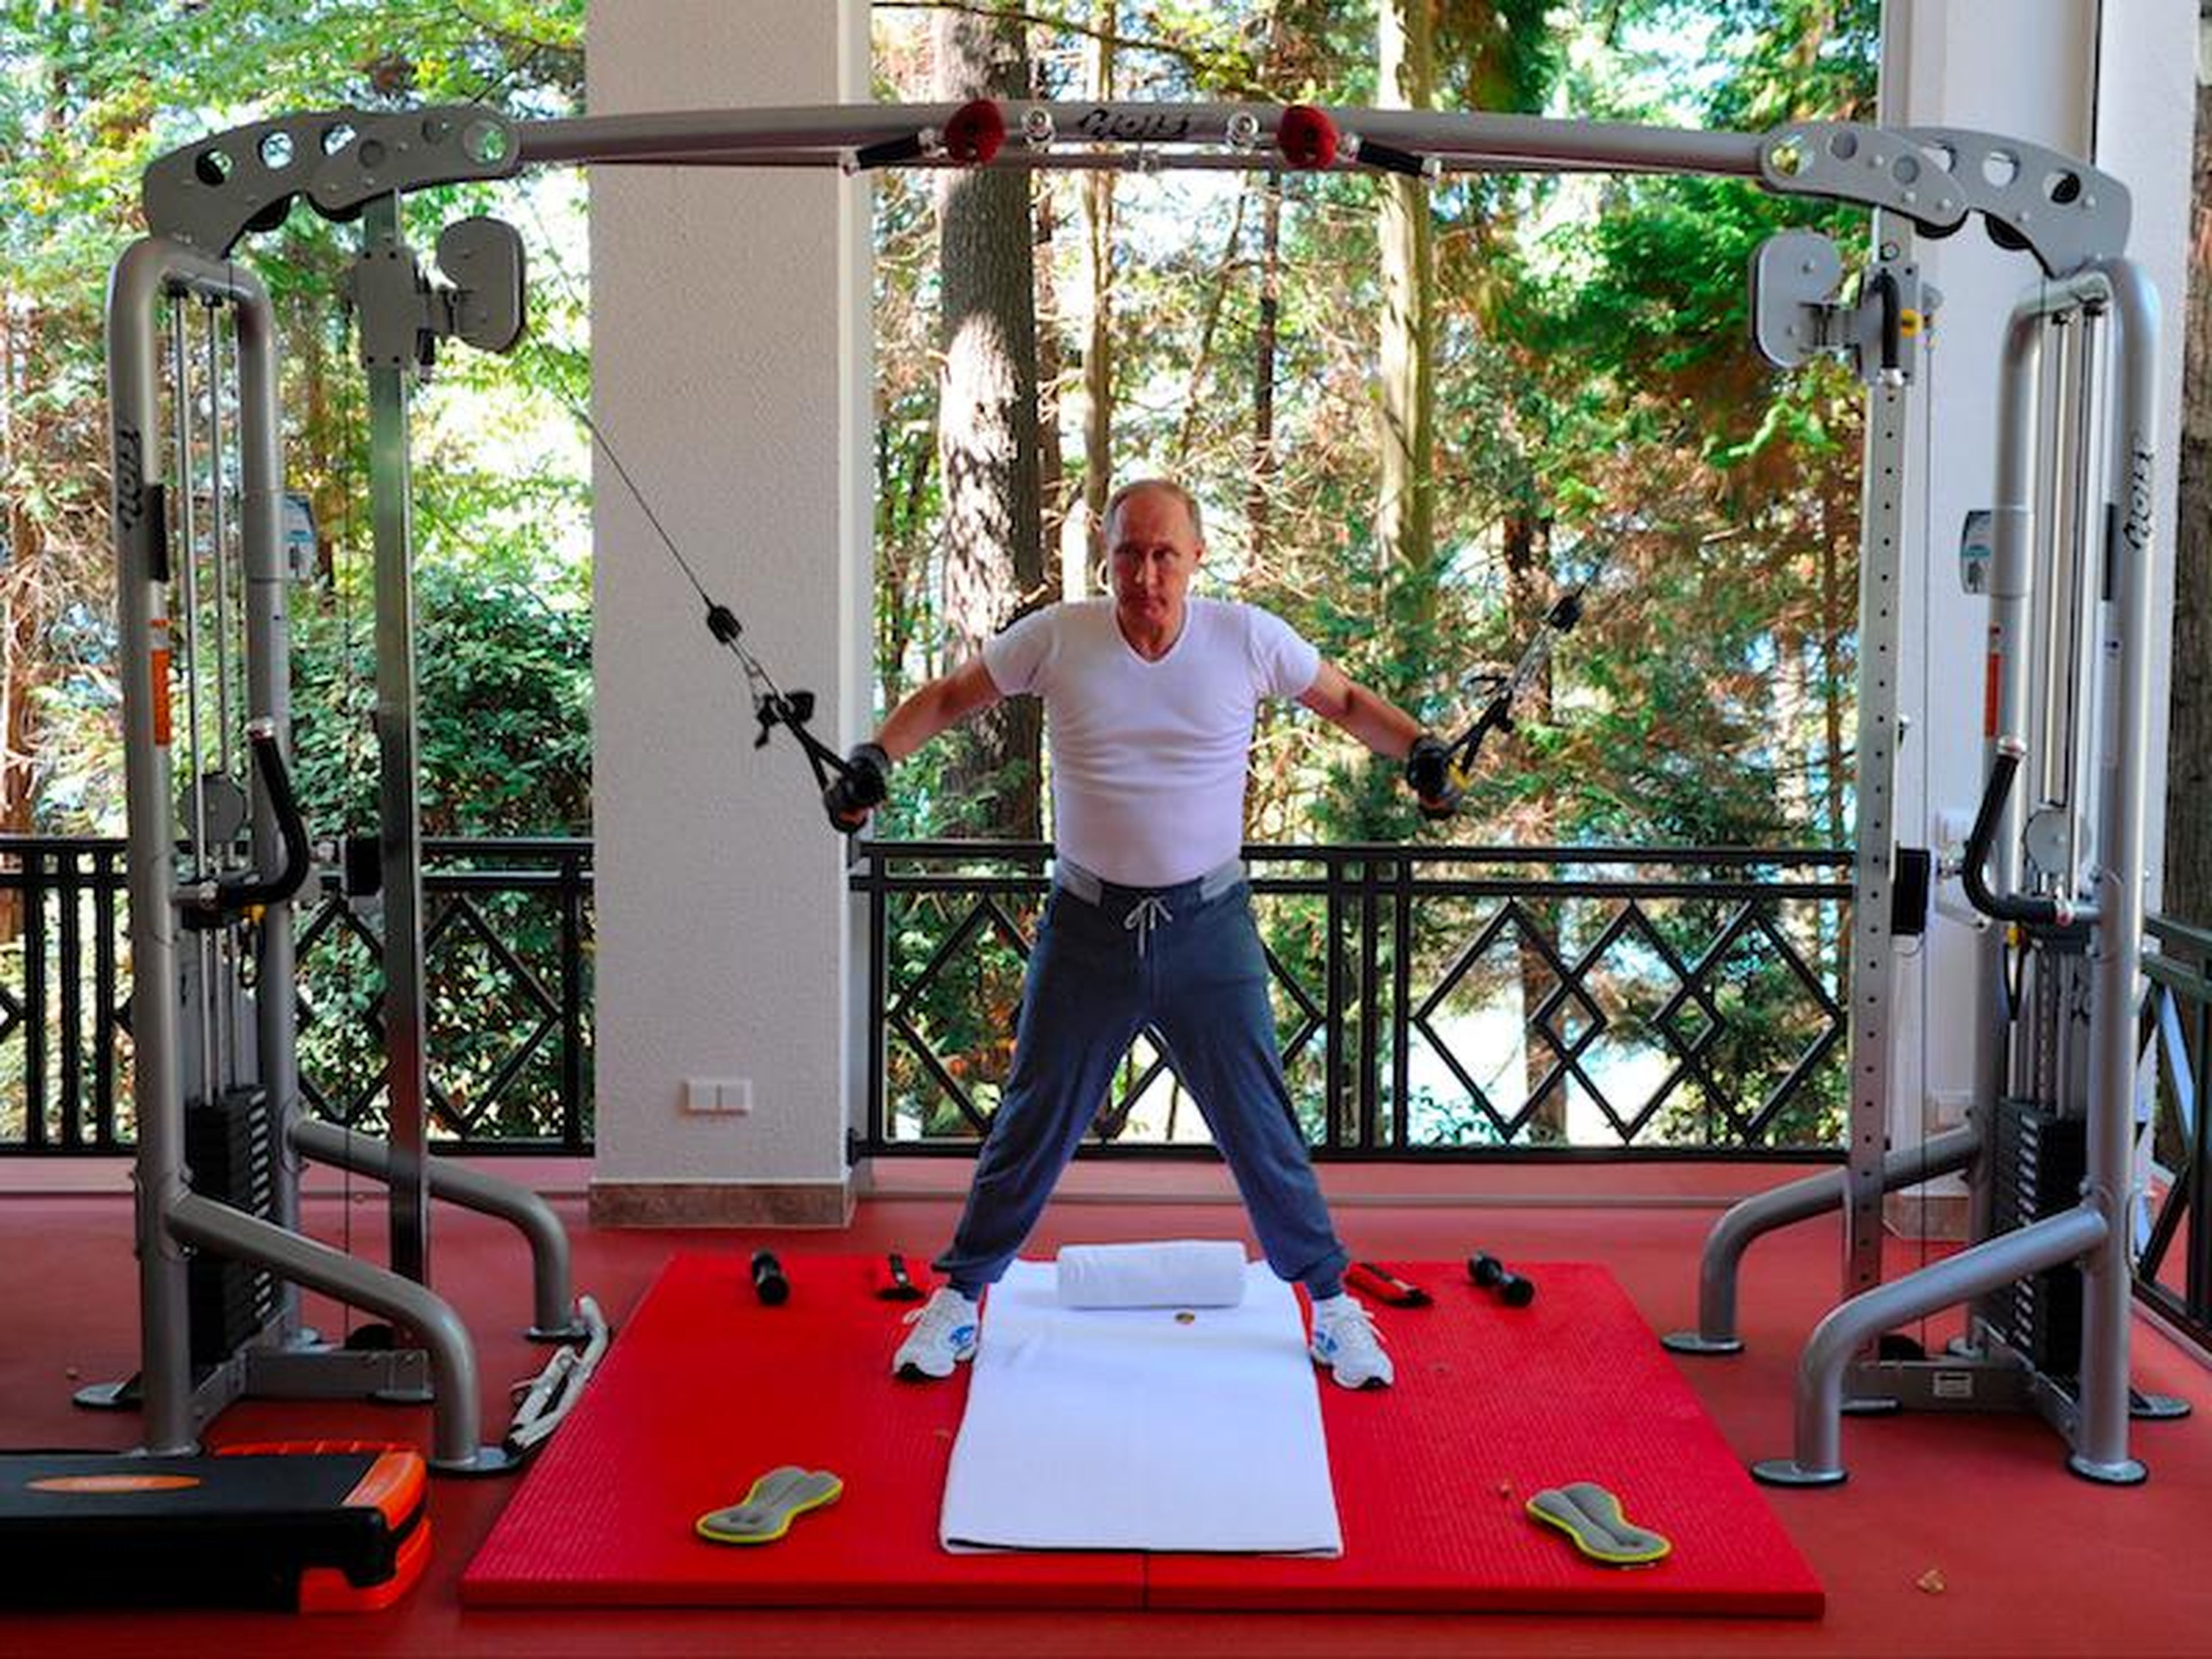 In 2015, Putin was photographed working out with Russian Prime Minister Dimitri Medvedev. Quartz reported that his Loro Piana silk and cashmere-blend sweatpants cost $1,425. Putin teamed this with a matching top, making the outfit